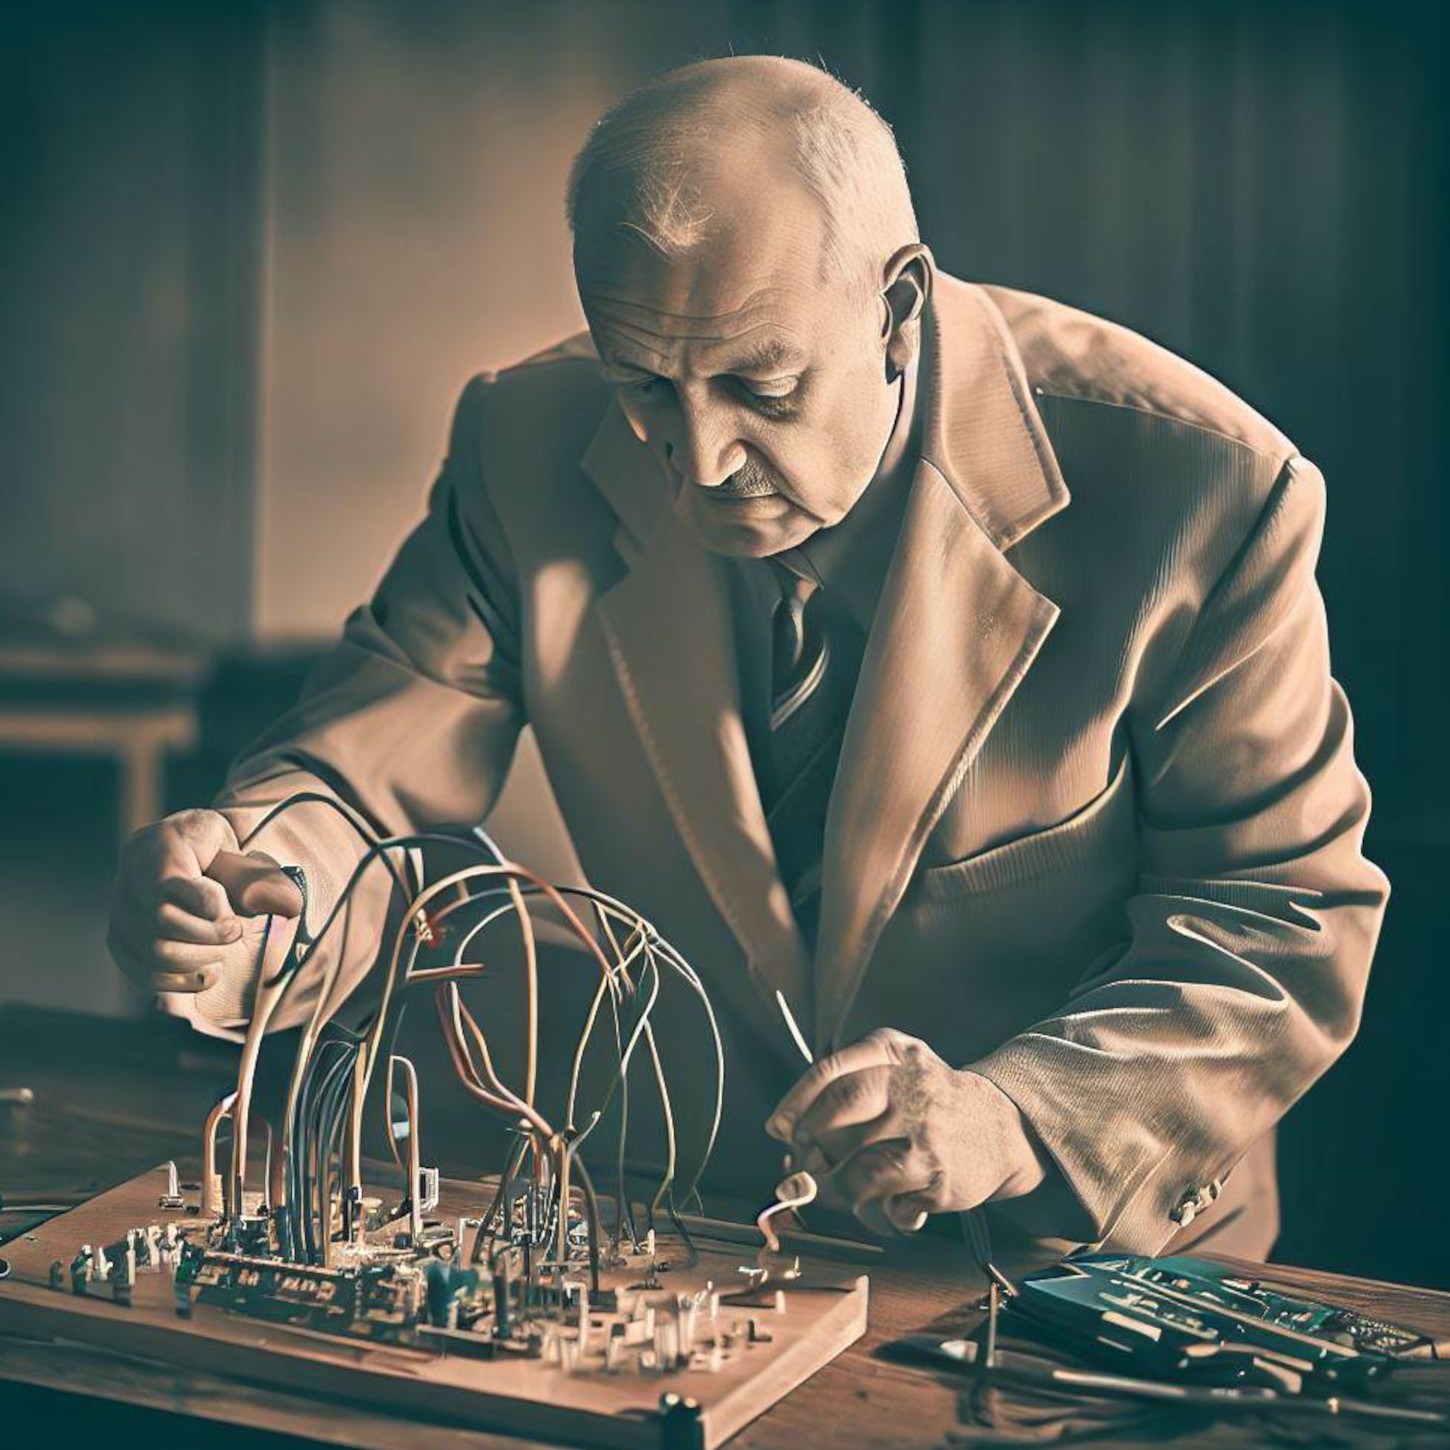 AI generated image of a man wearing a suit working on an electrical circuit.